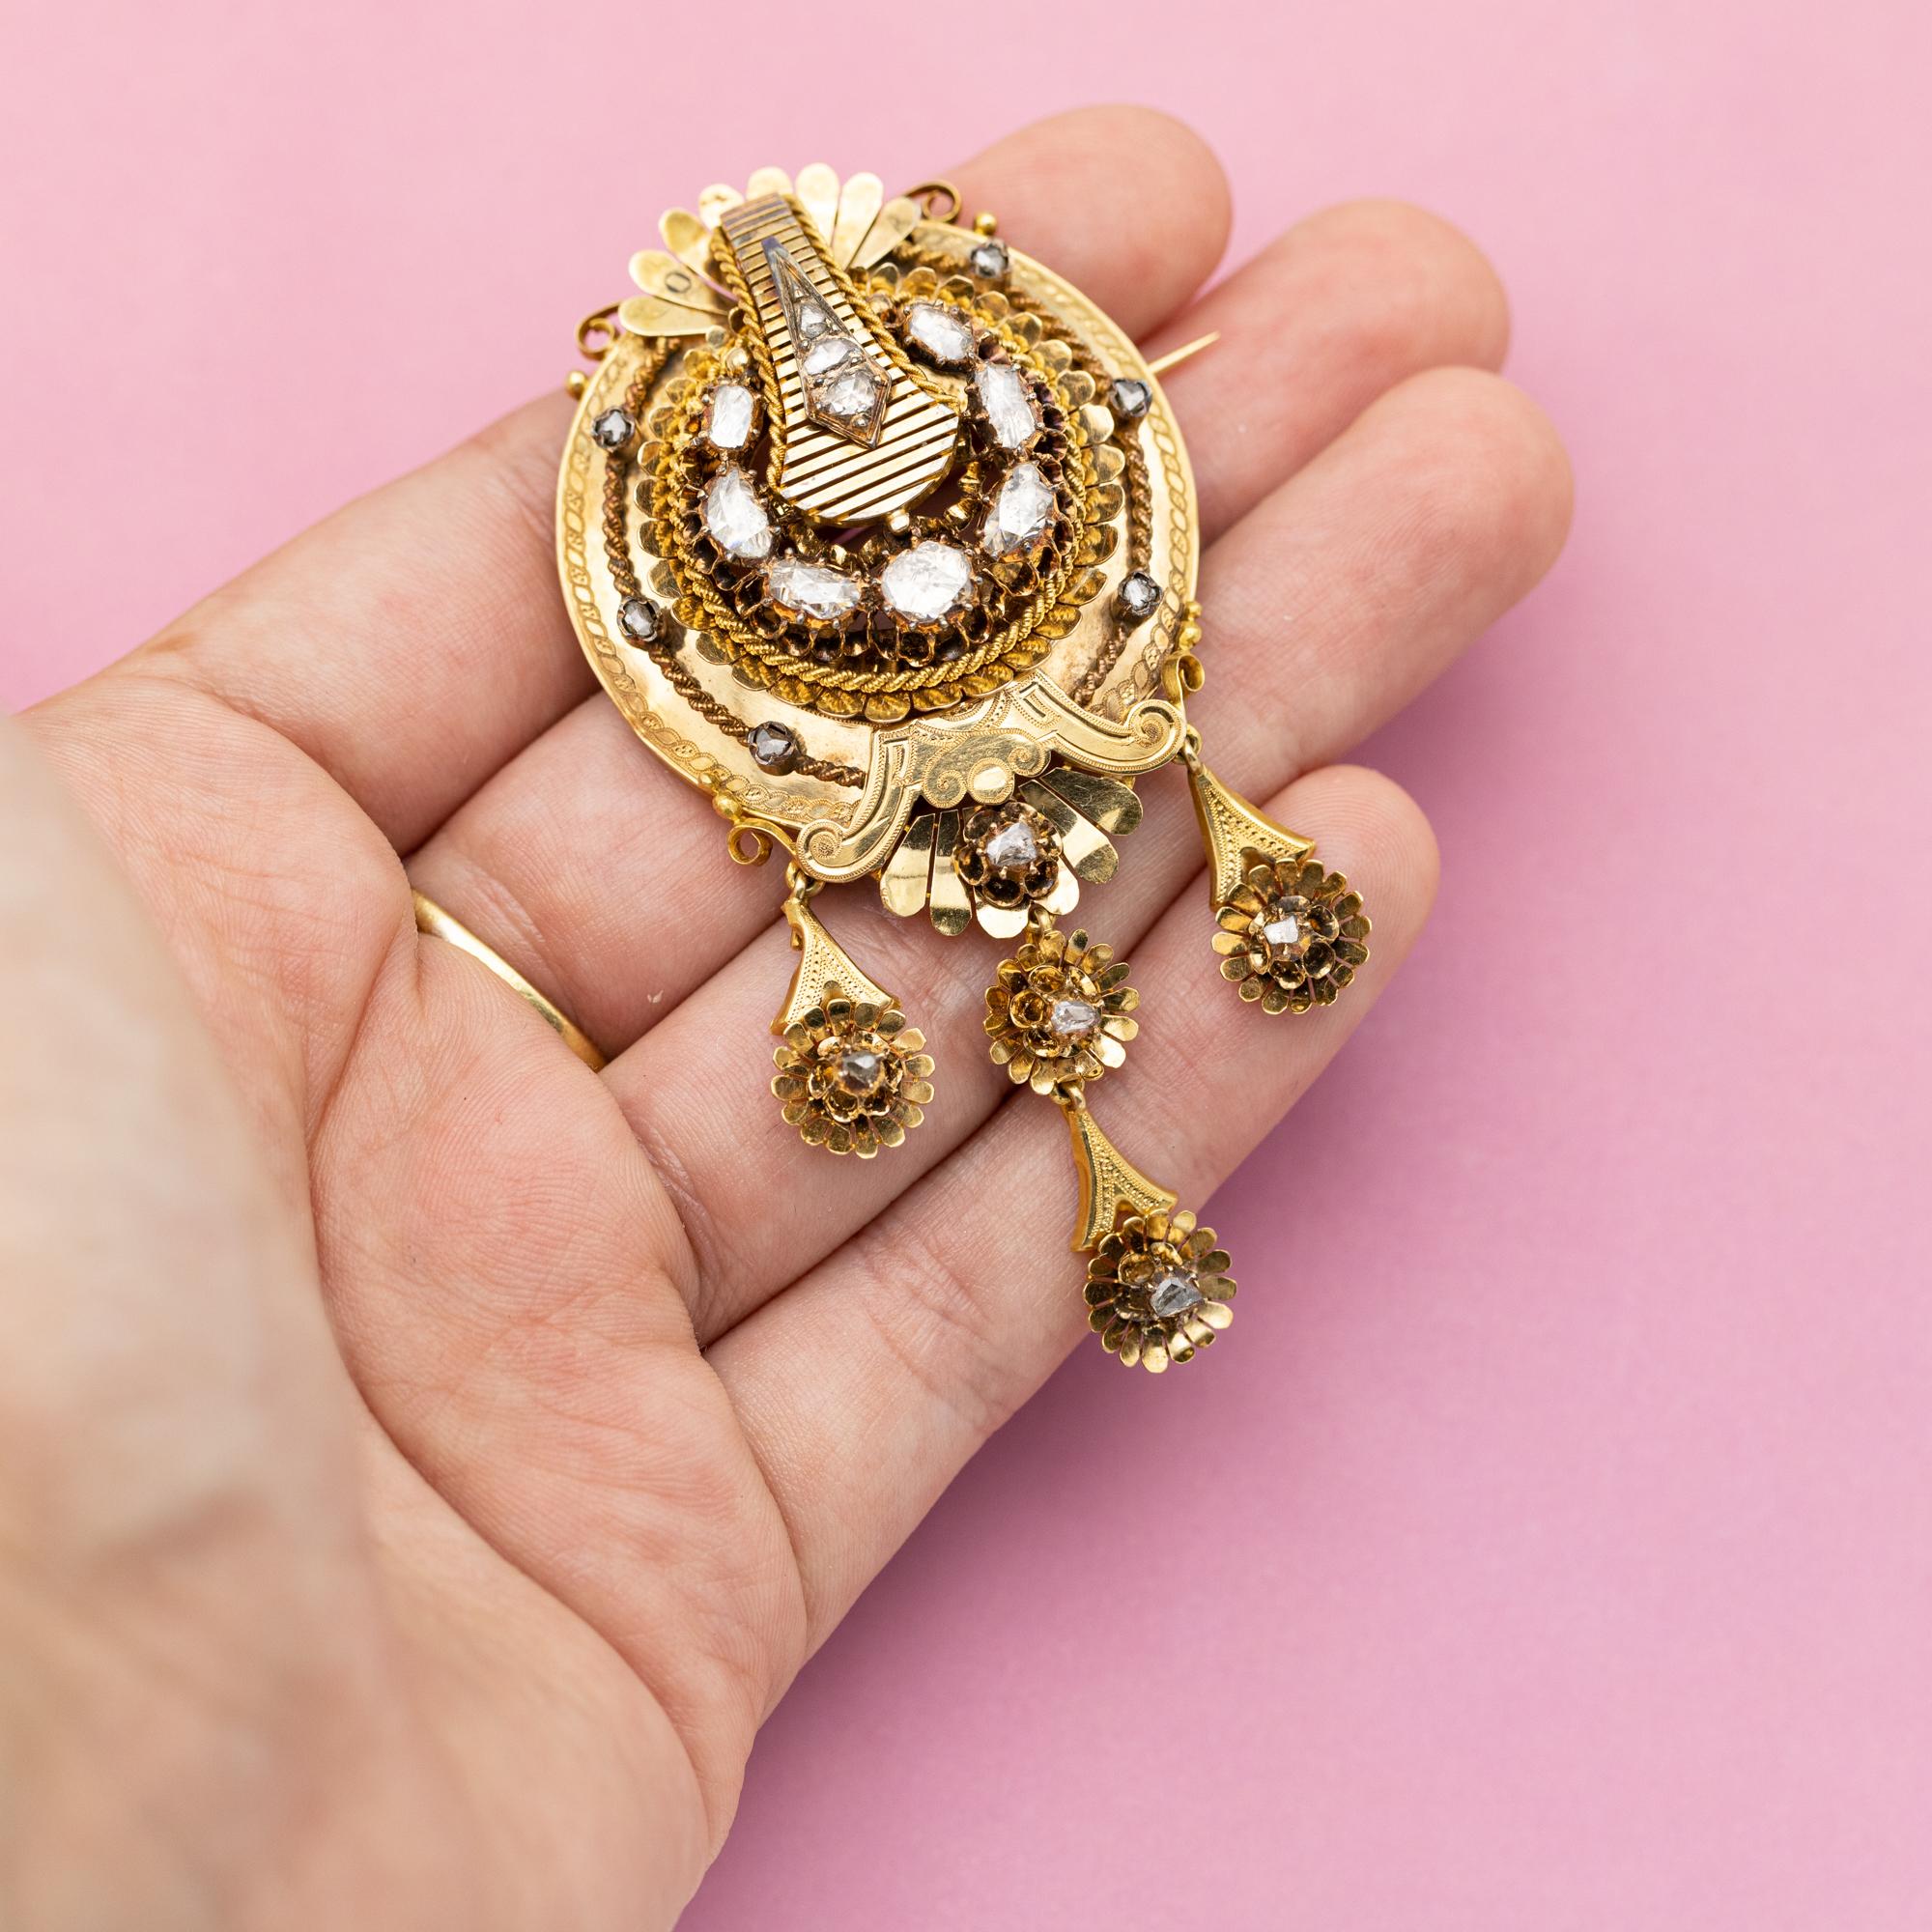 18ct yellow gold Victorian brooch - Large and heavy foiled back diamond heirloom For Sale 2